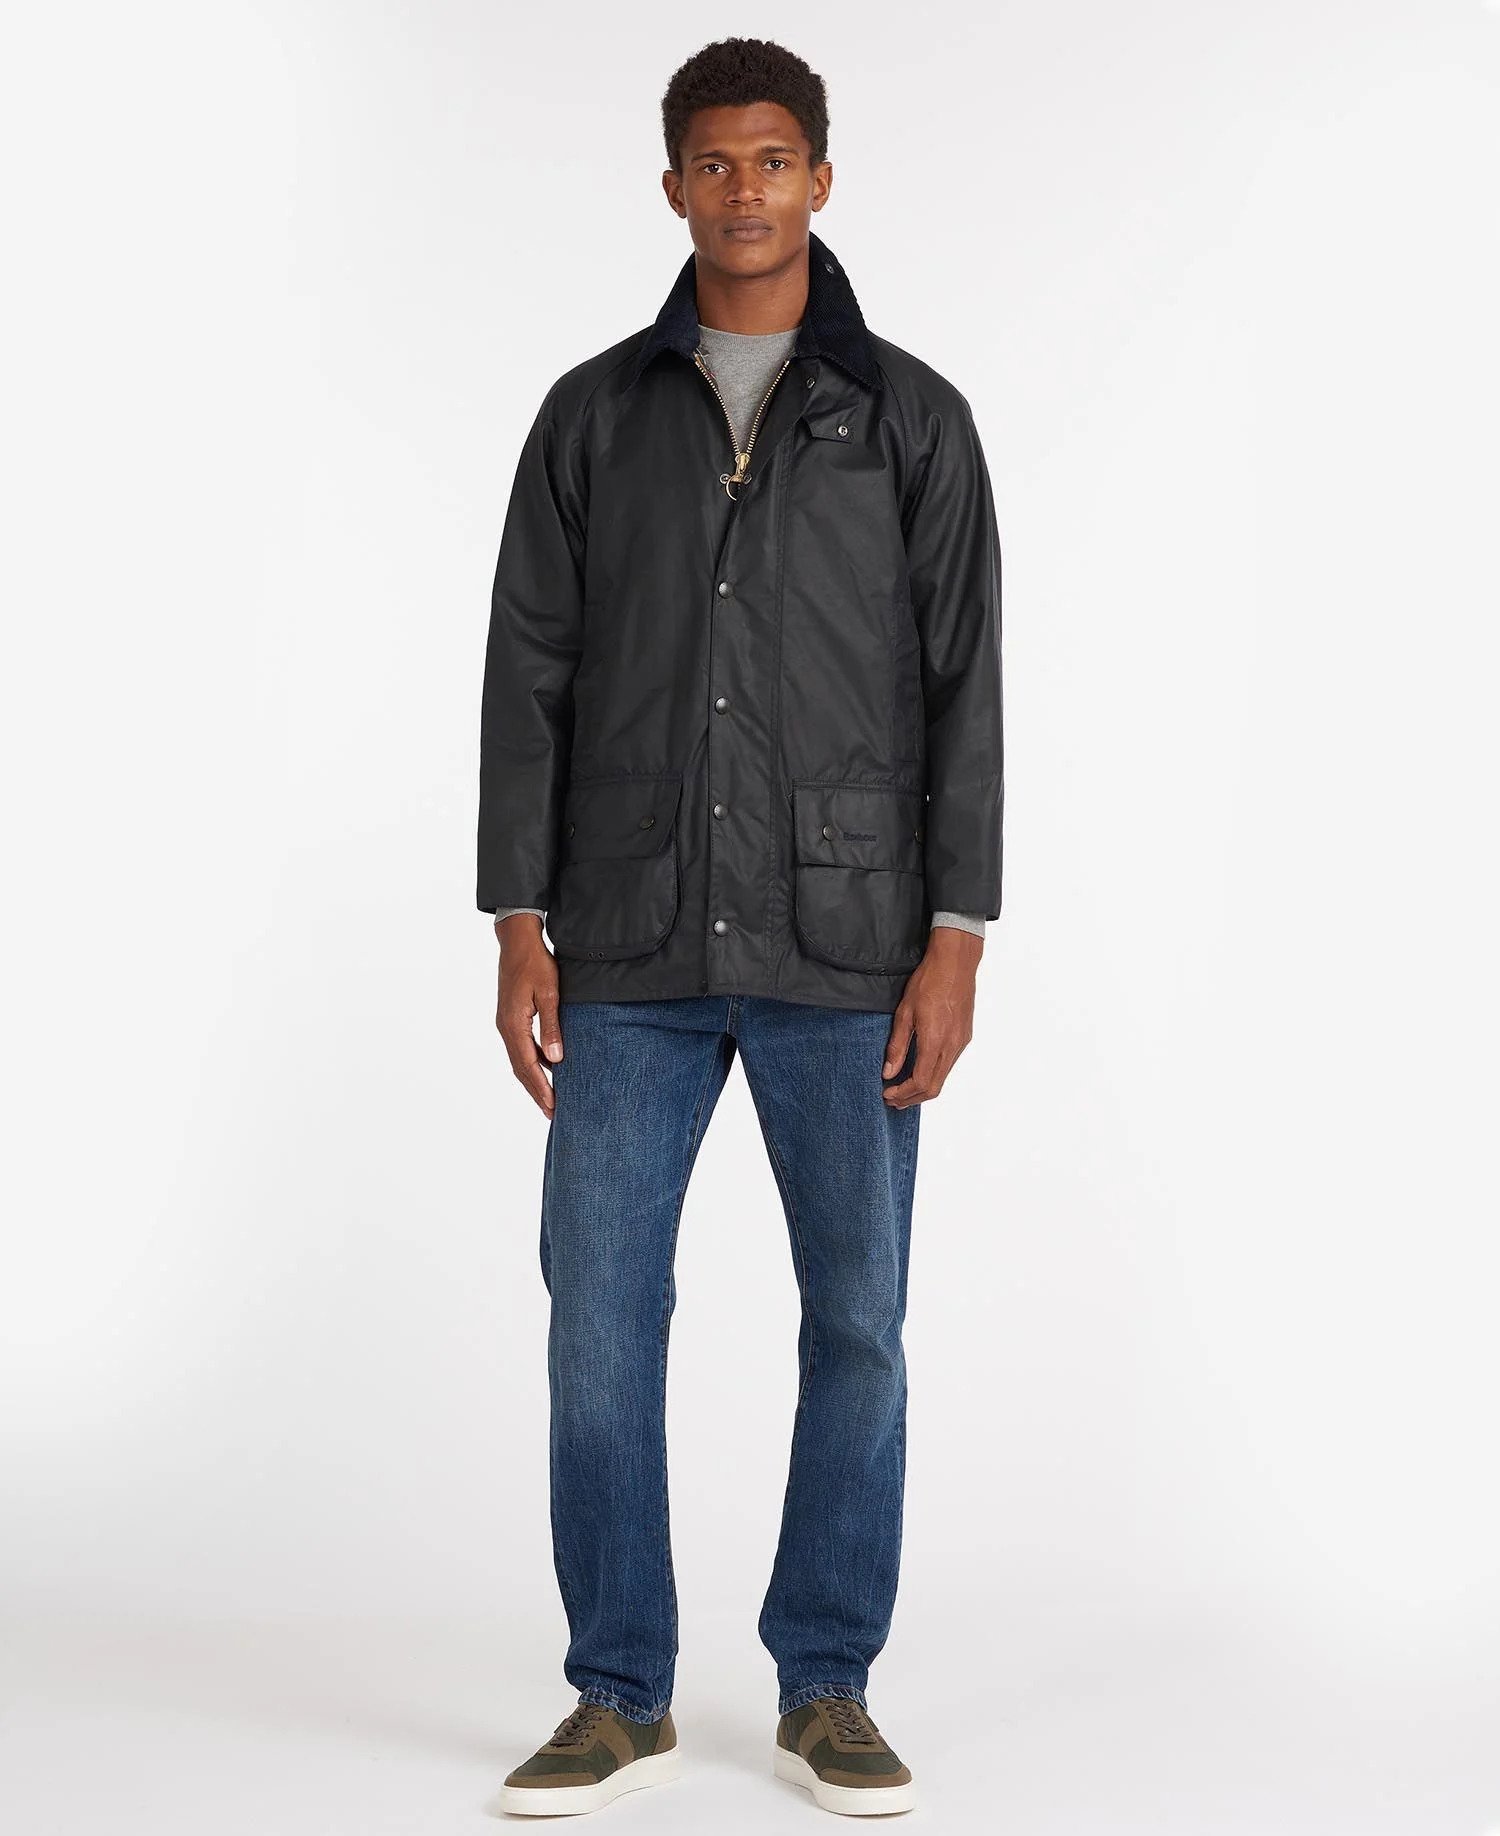 A look at the Iconic Barbour Beaufort Jacket | Barbour